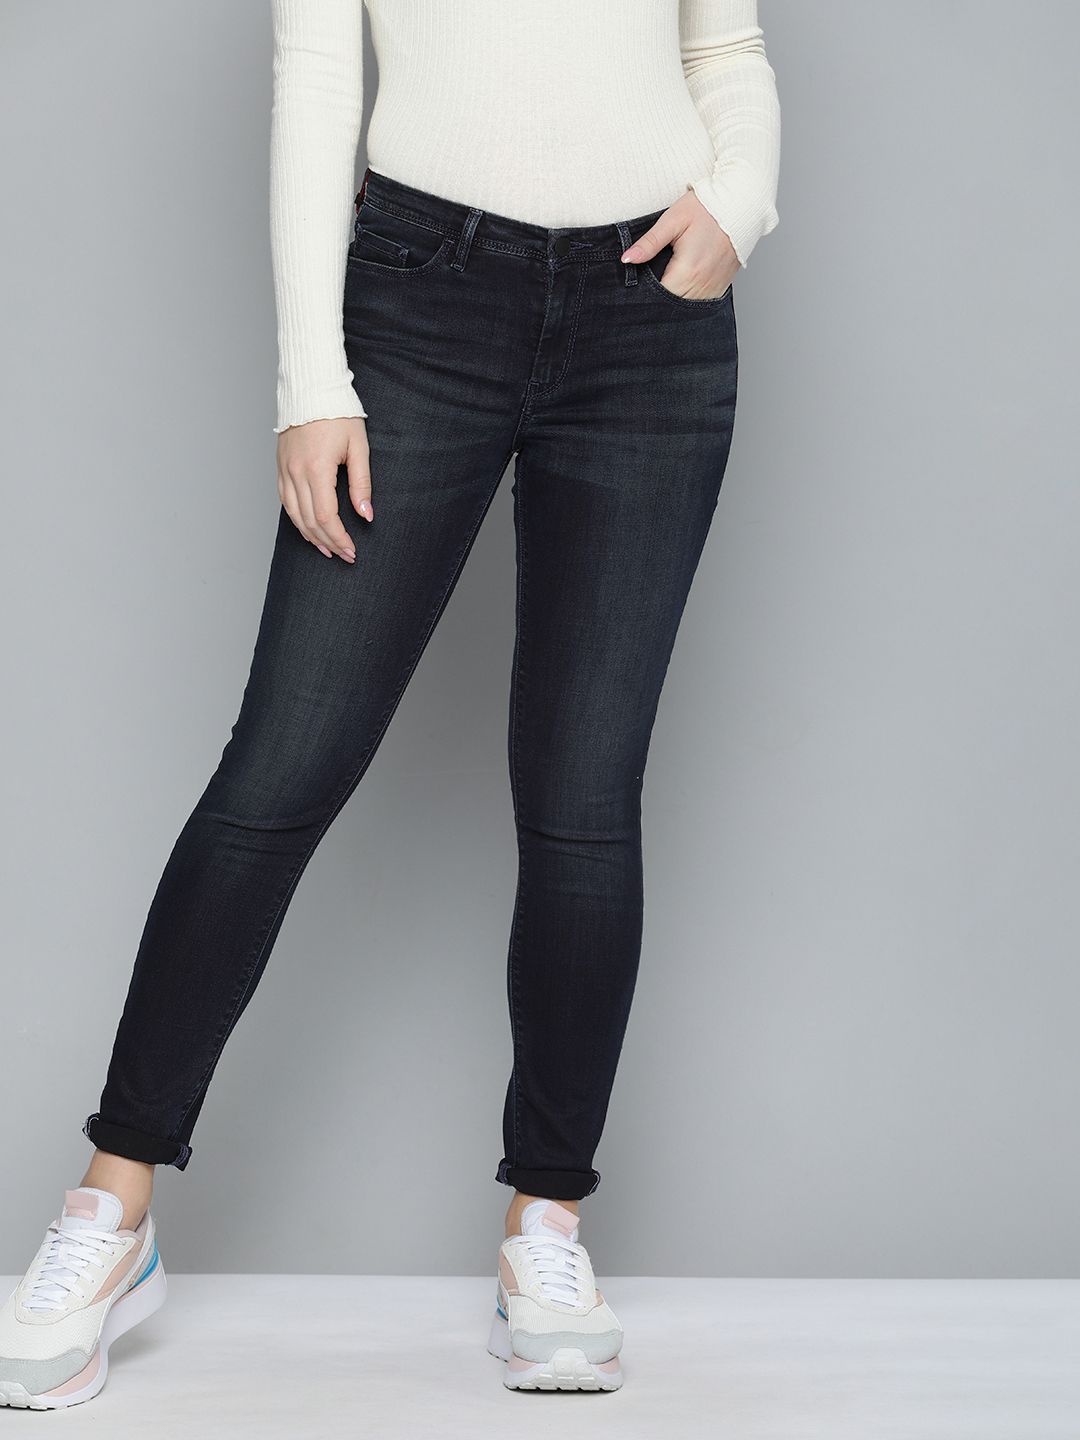 Levis Women Blue 711 Skinny Fit Light Fade Stretchable Jeans Price in  India, Full Specifications & Offers 